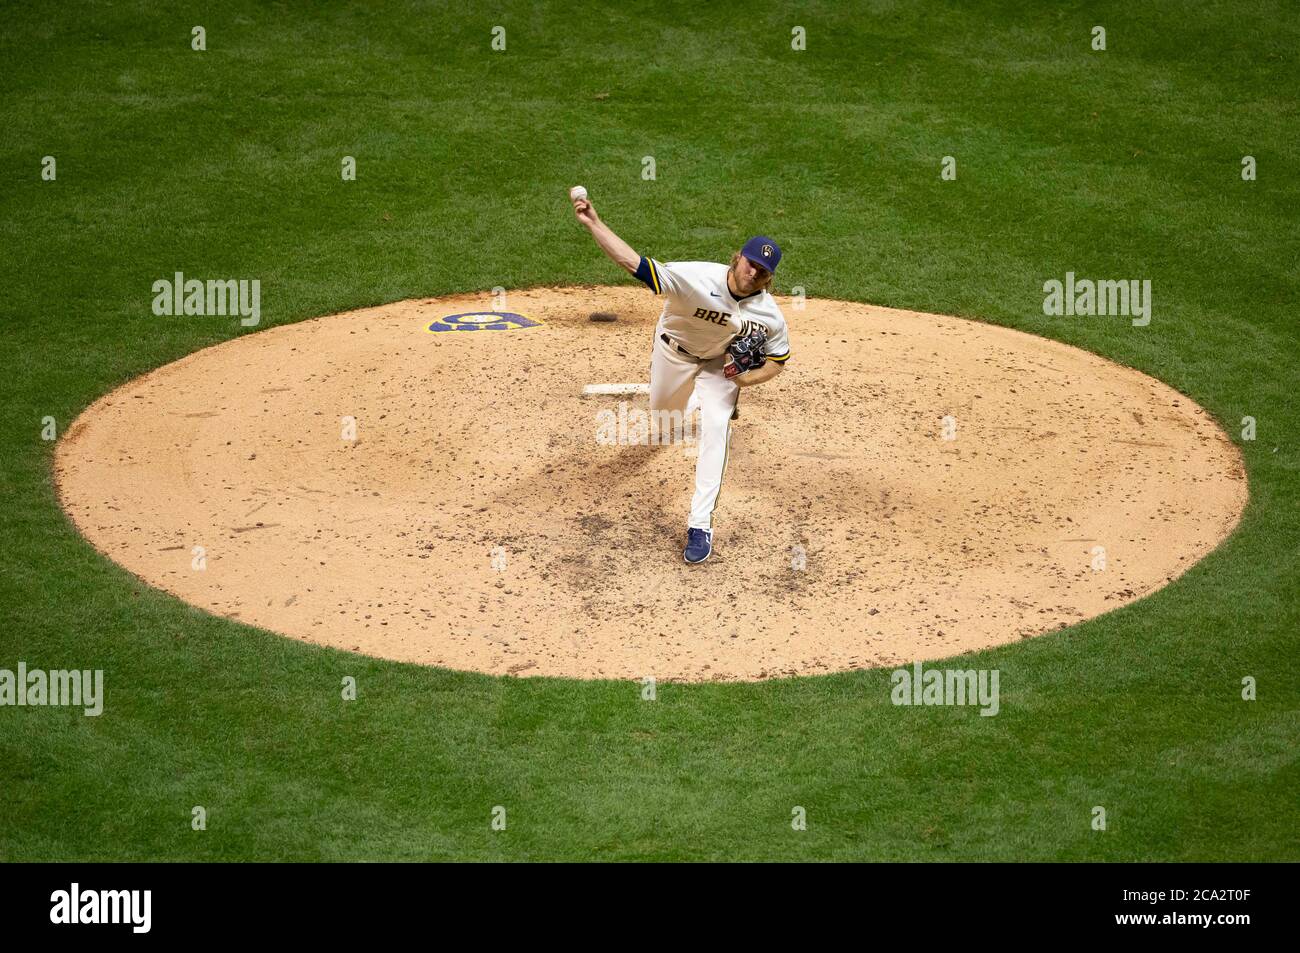 Milwaukee, USA. August 3, 2020: An upper deck view of Milwaukee Brewers relief pitcher Corbin Burnes #39 delivering a pitch duringthe Major League Baseball game between the Milwaukee Brewers and the Chicago White Sox at Miller Park in Milwaukee, WI. John Fisher/CSM Credit: Cal Sport Media/Alamy Live News Stock Photo